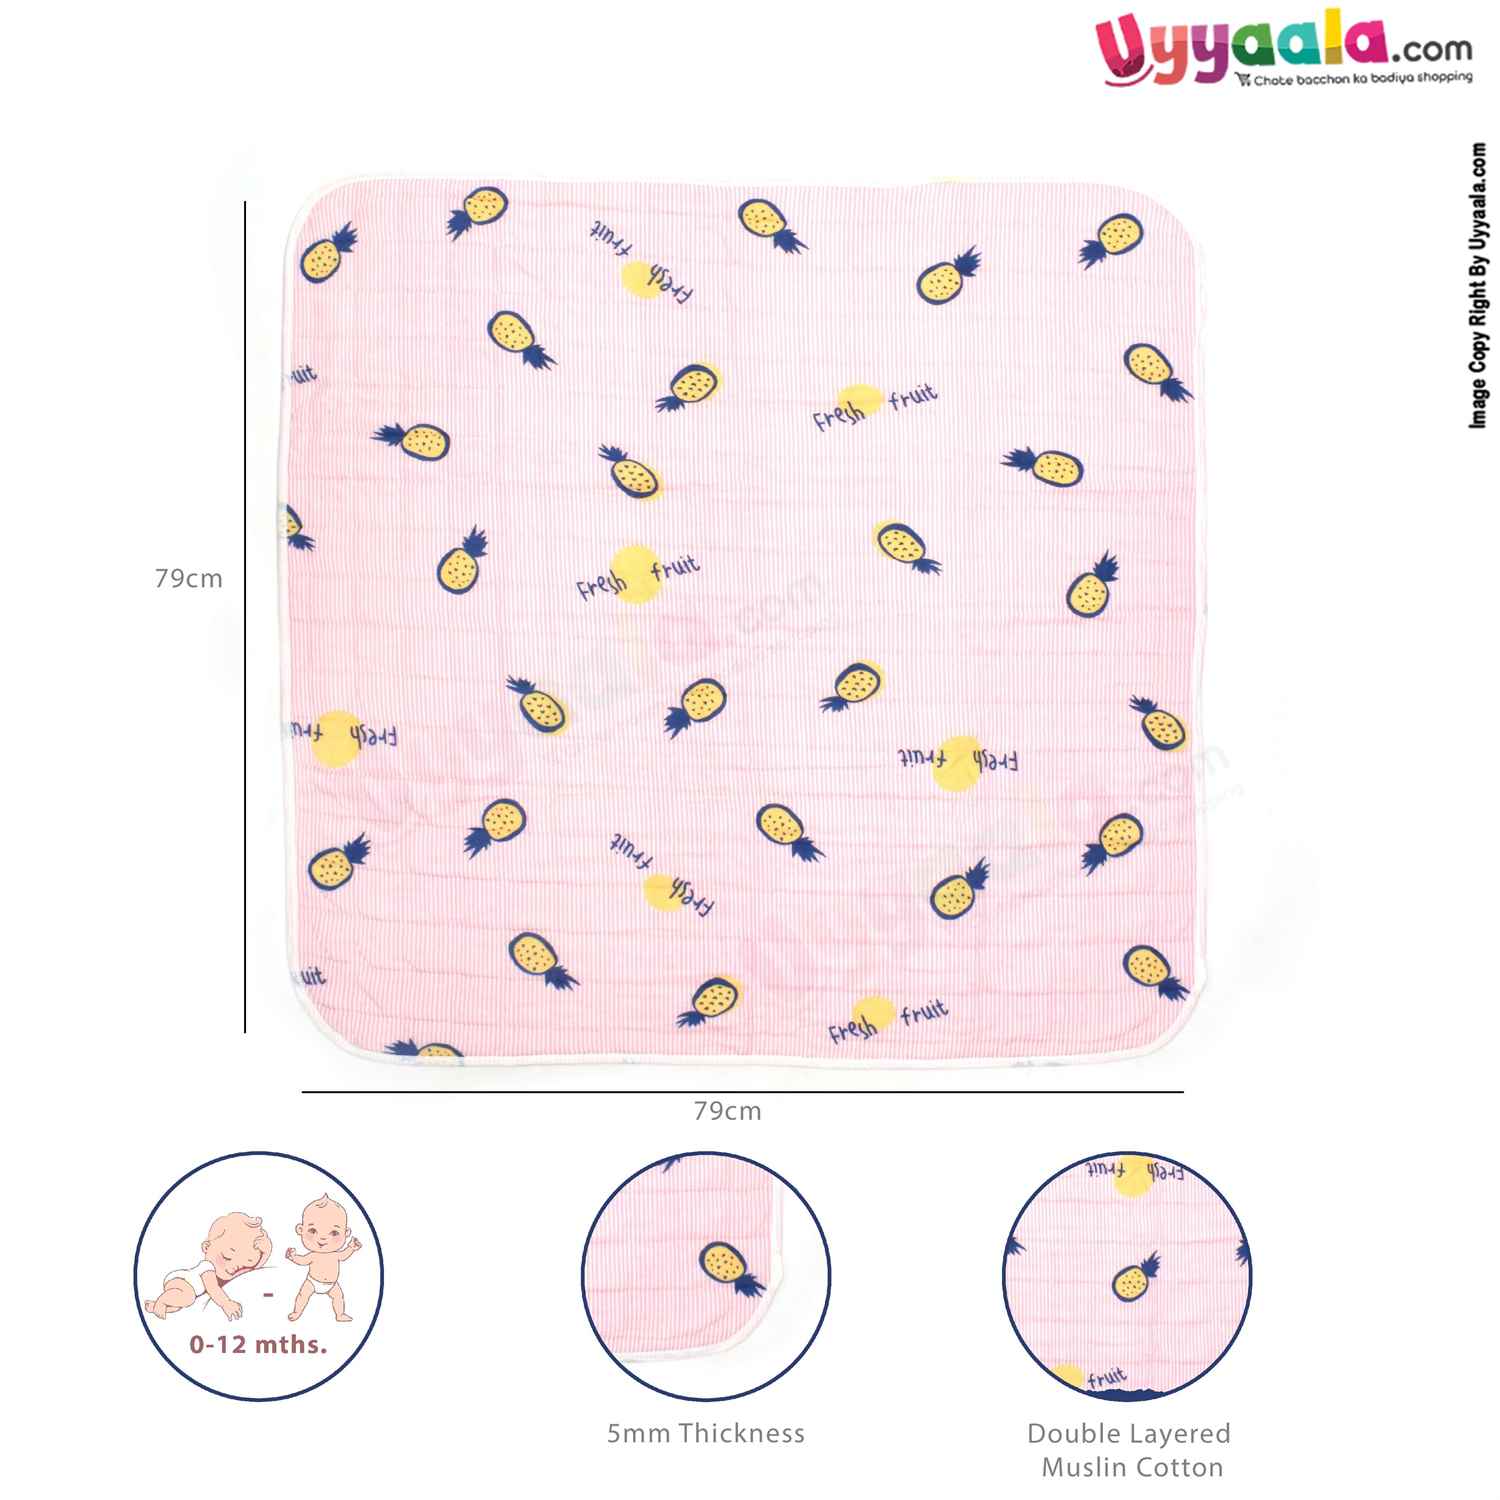 Double Layered Hooded Swaddle Wrapper with Stuff & Waist Belt Pineapple Print for Babies 0+m Age, Size (92*88cm)-Pink